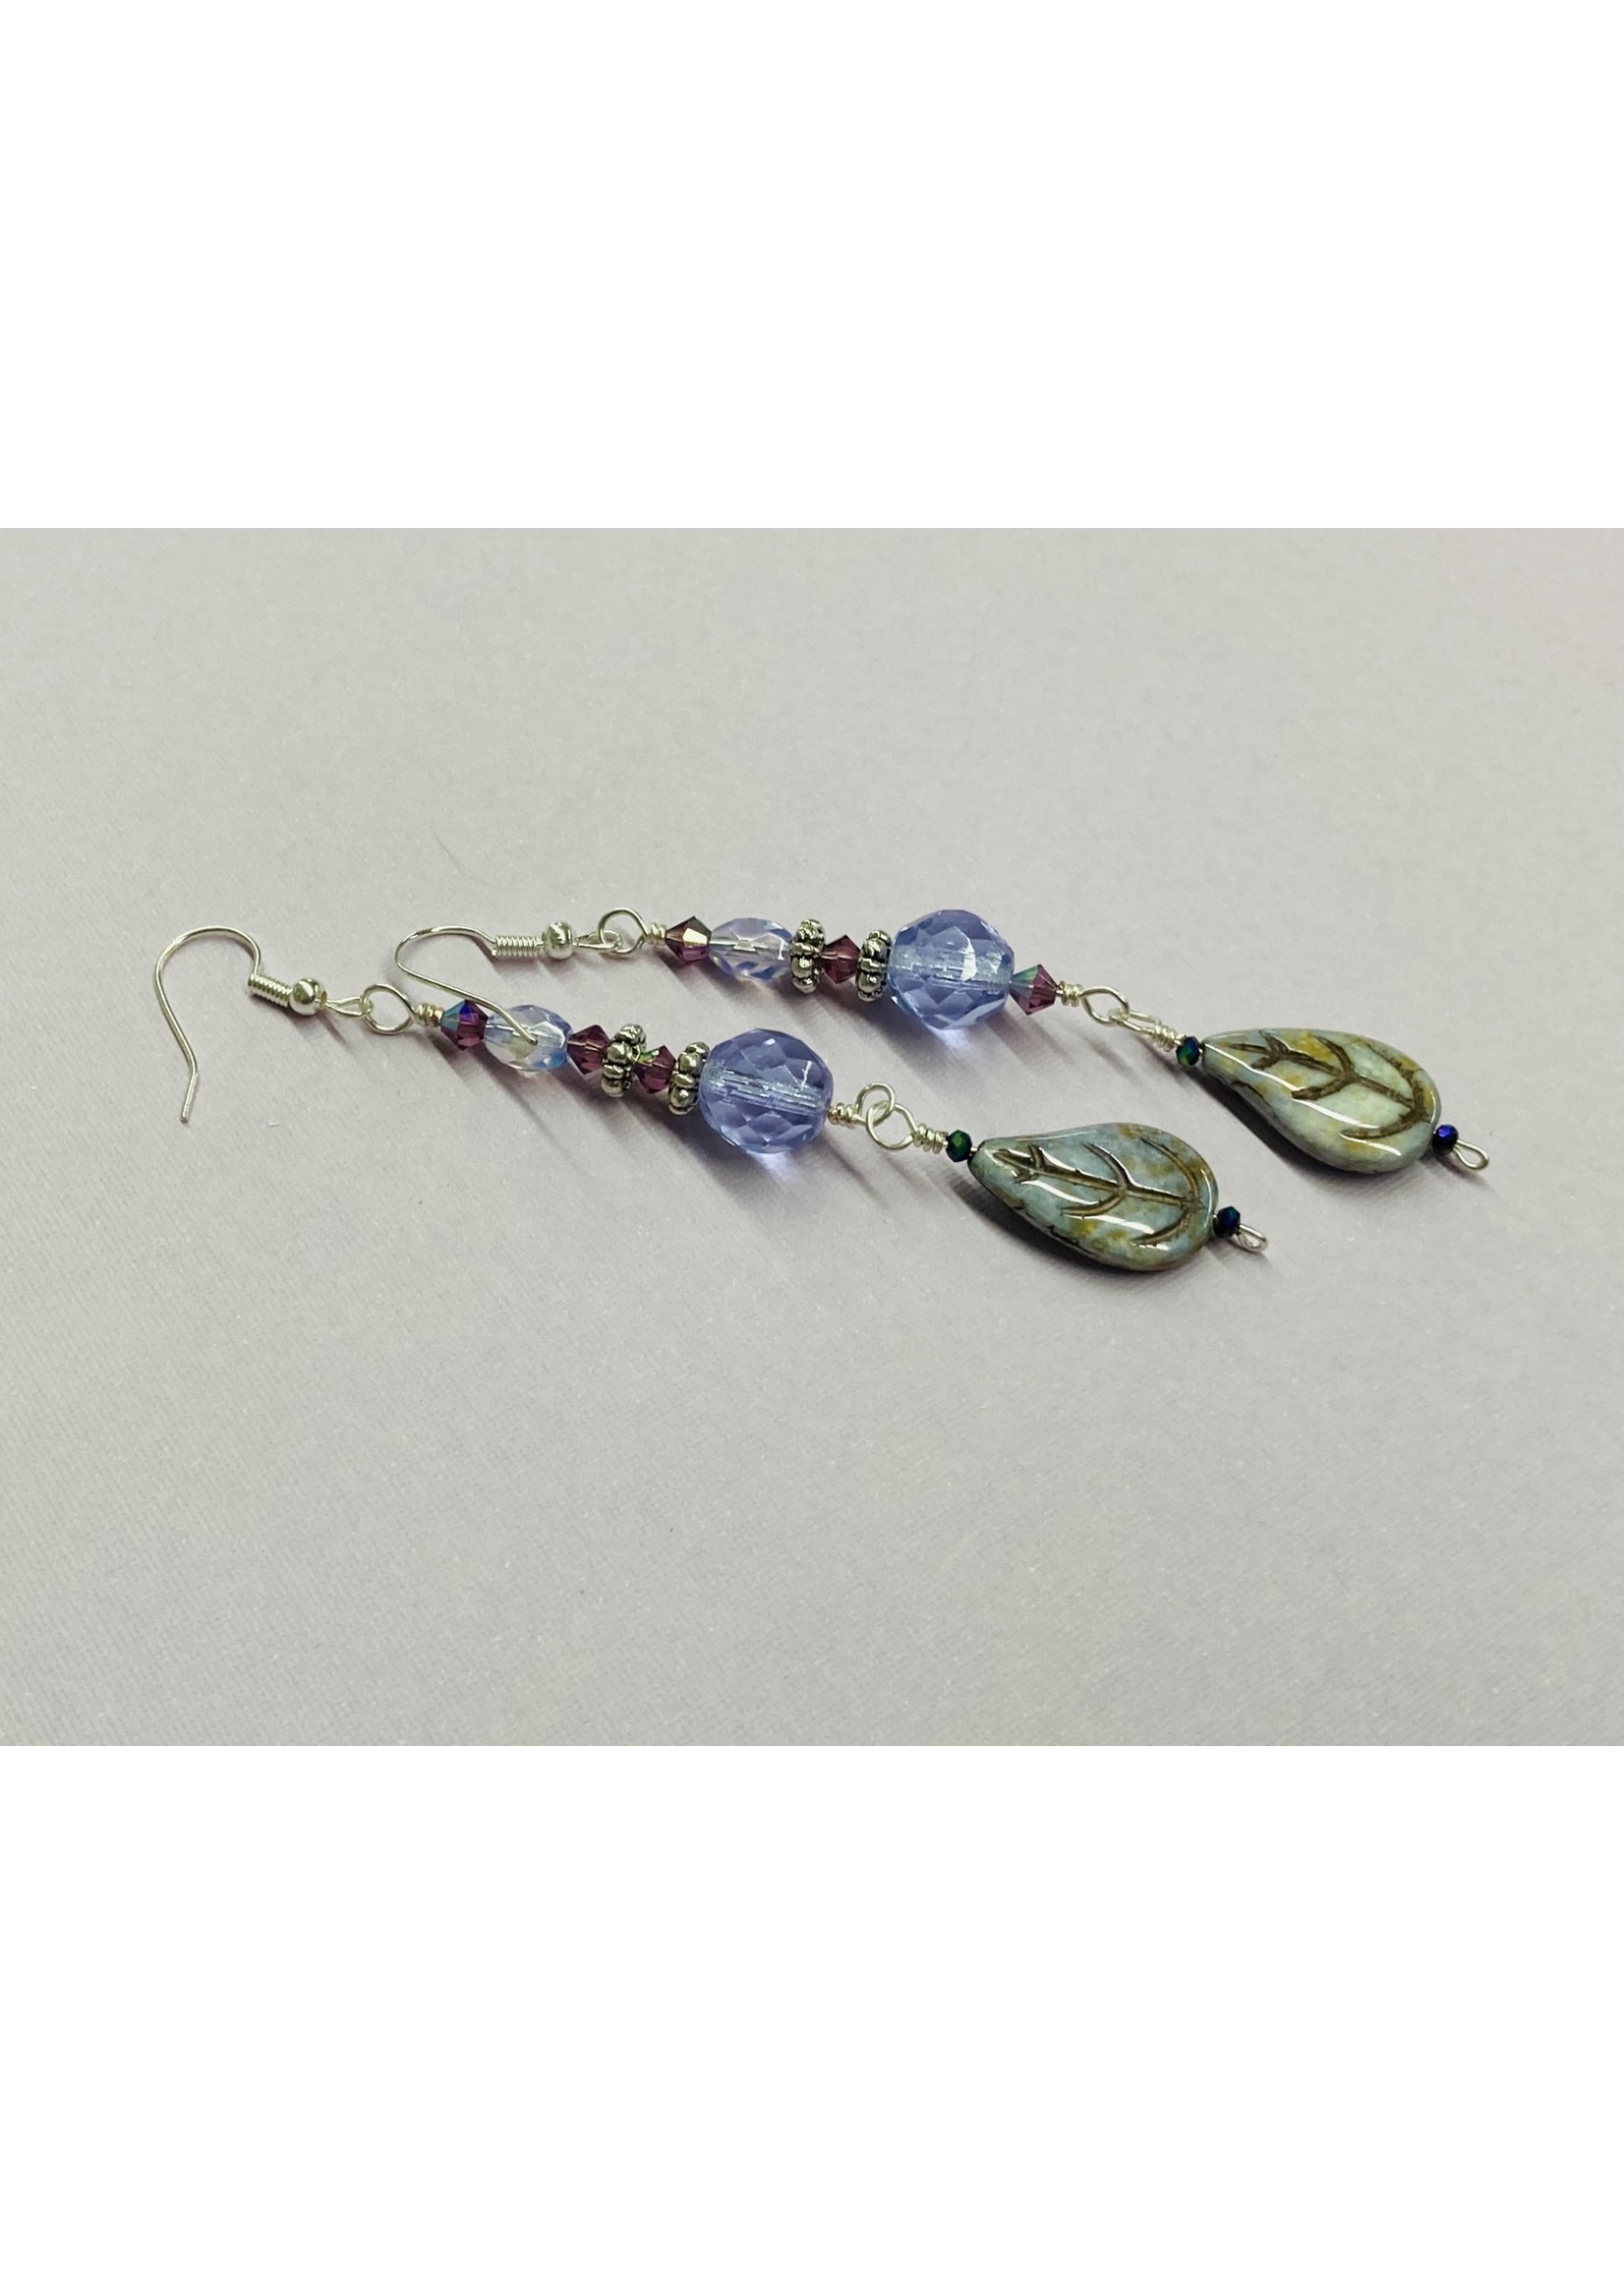 Our Twisted Dahlia E013 Lavender and Purple Crystals Accented with Silver Findings and Czech Glass Leaf Earrings